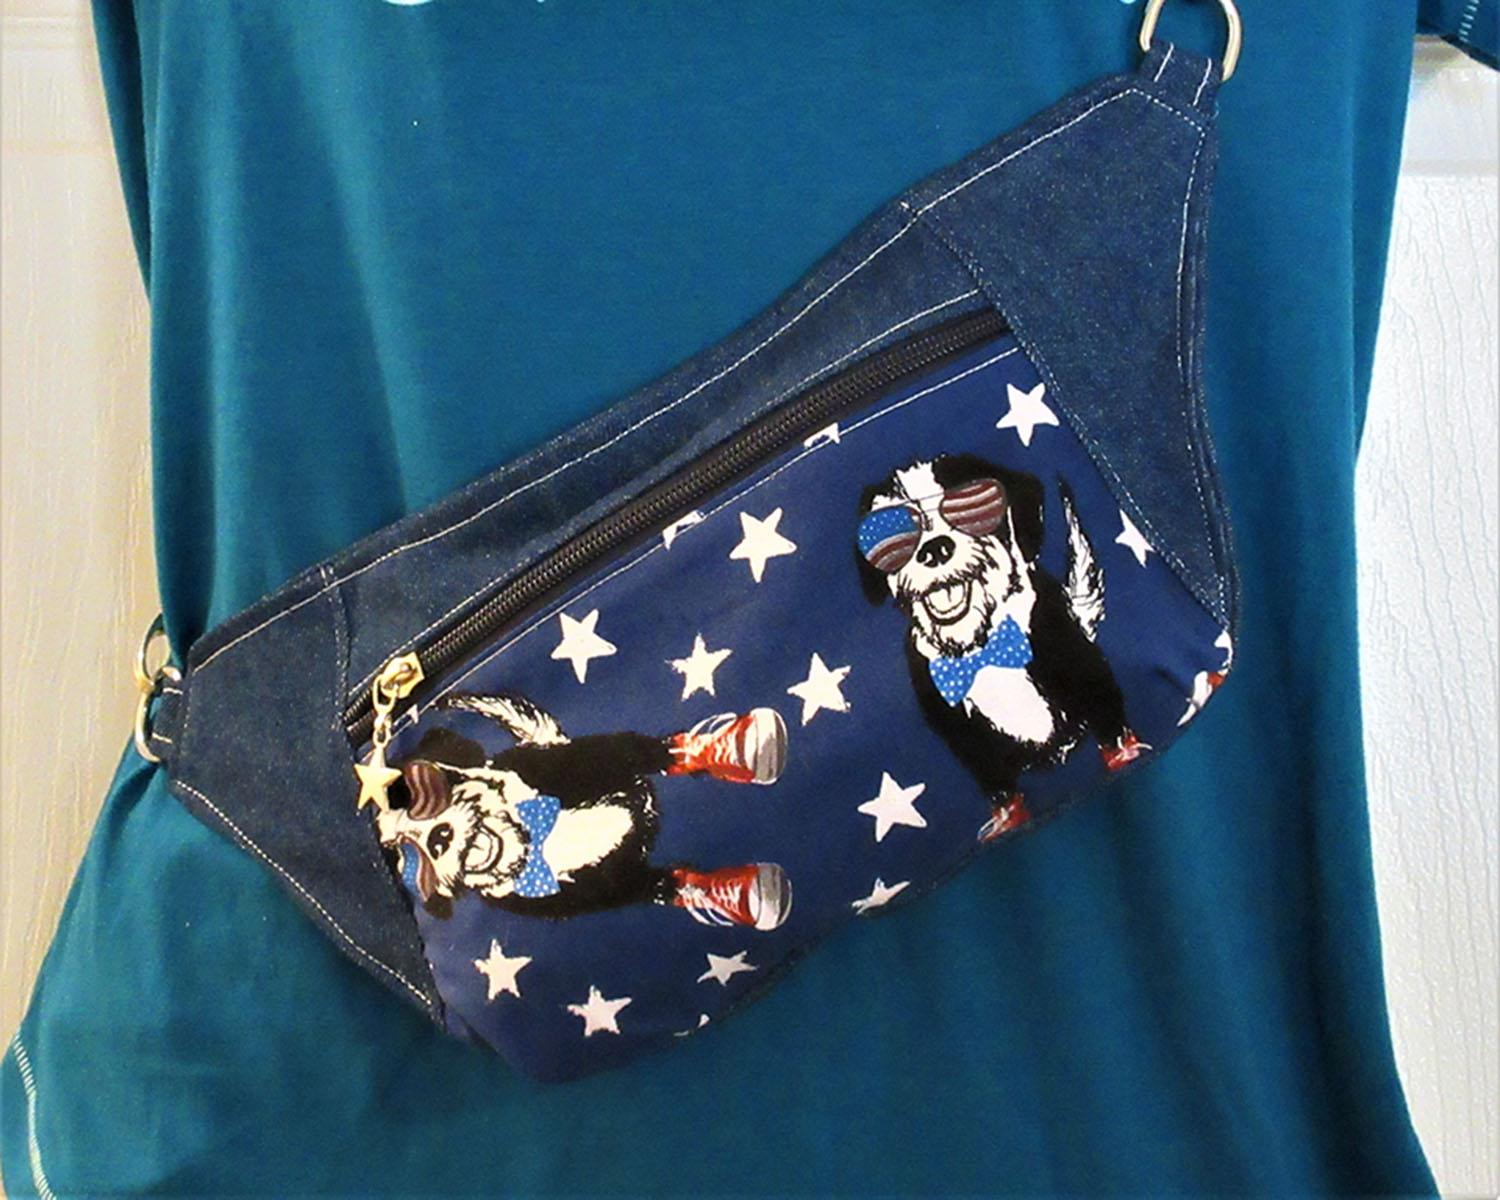 Rock Star Dog Fanny Pack for men or women Adjustable strap with Red white and blue lining handmade in USA by A Fur Baby Favorite